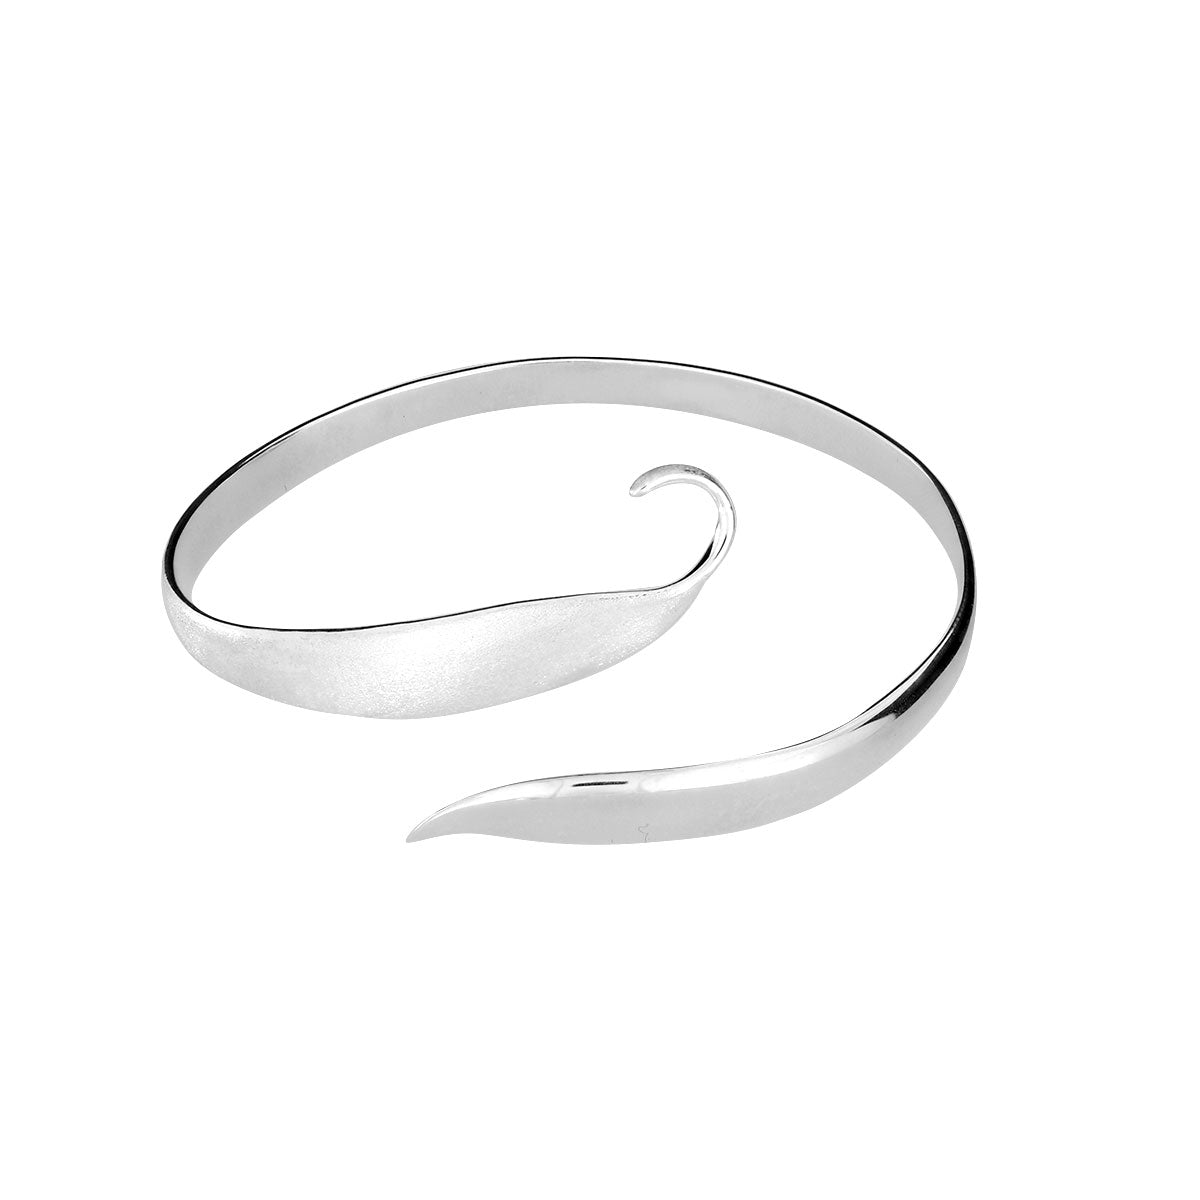 Polished & Frosted Silver Curling Bangle